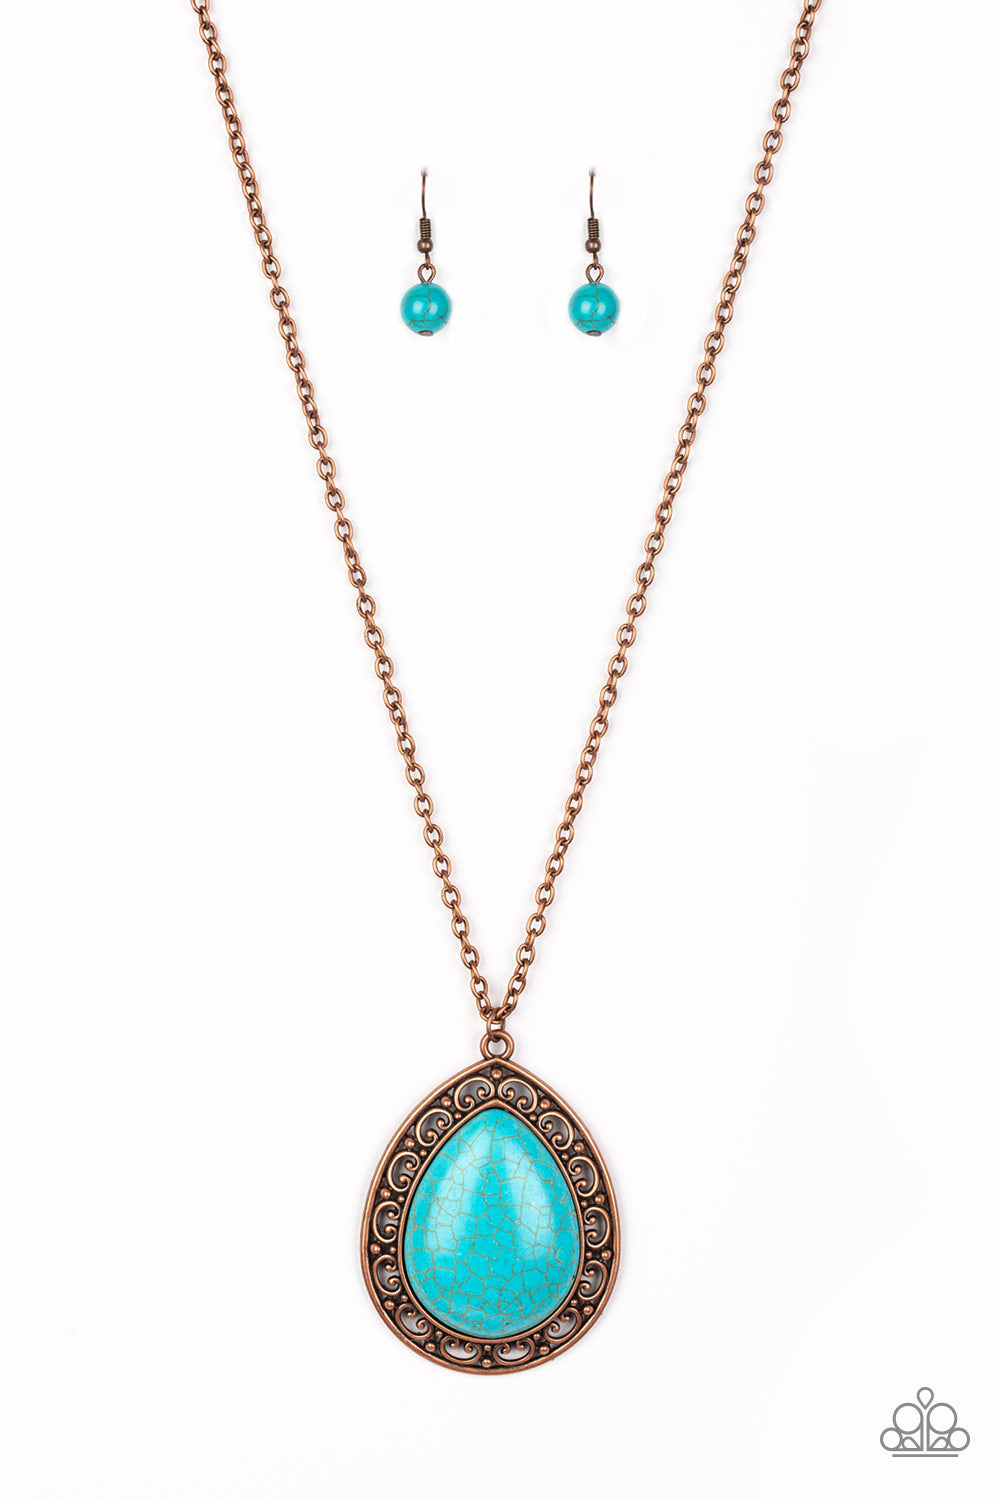 Paparazzi necklace - Full Frontier - Copper